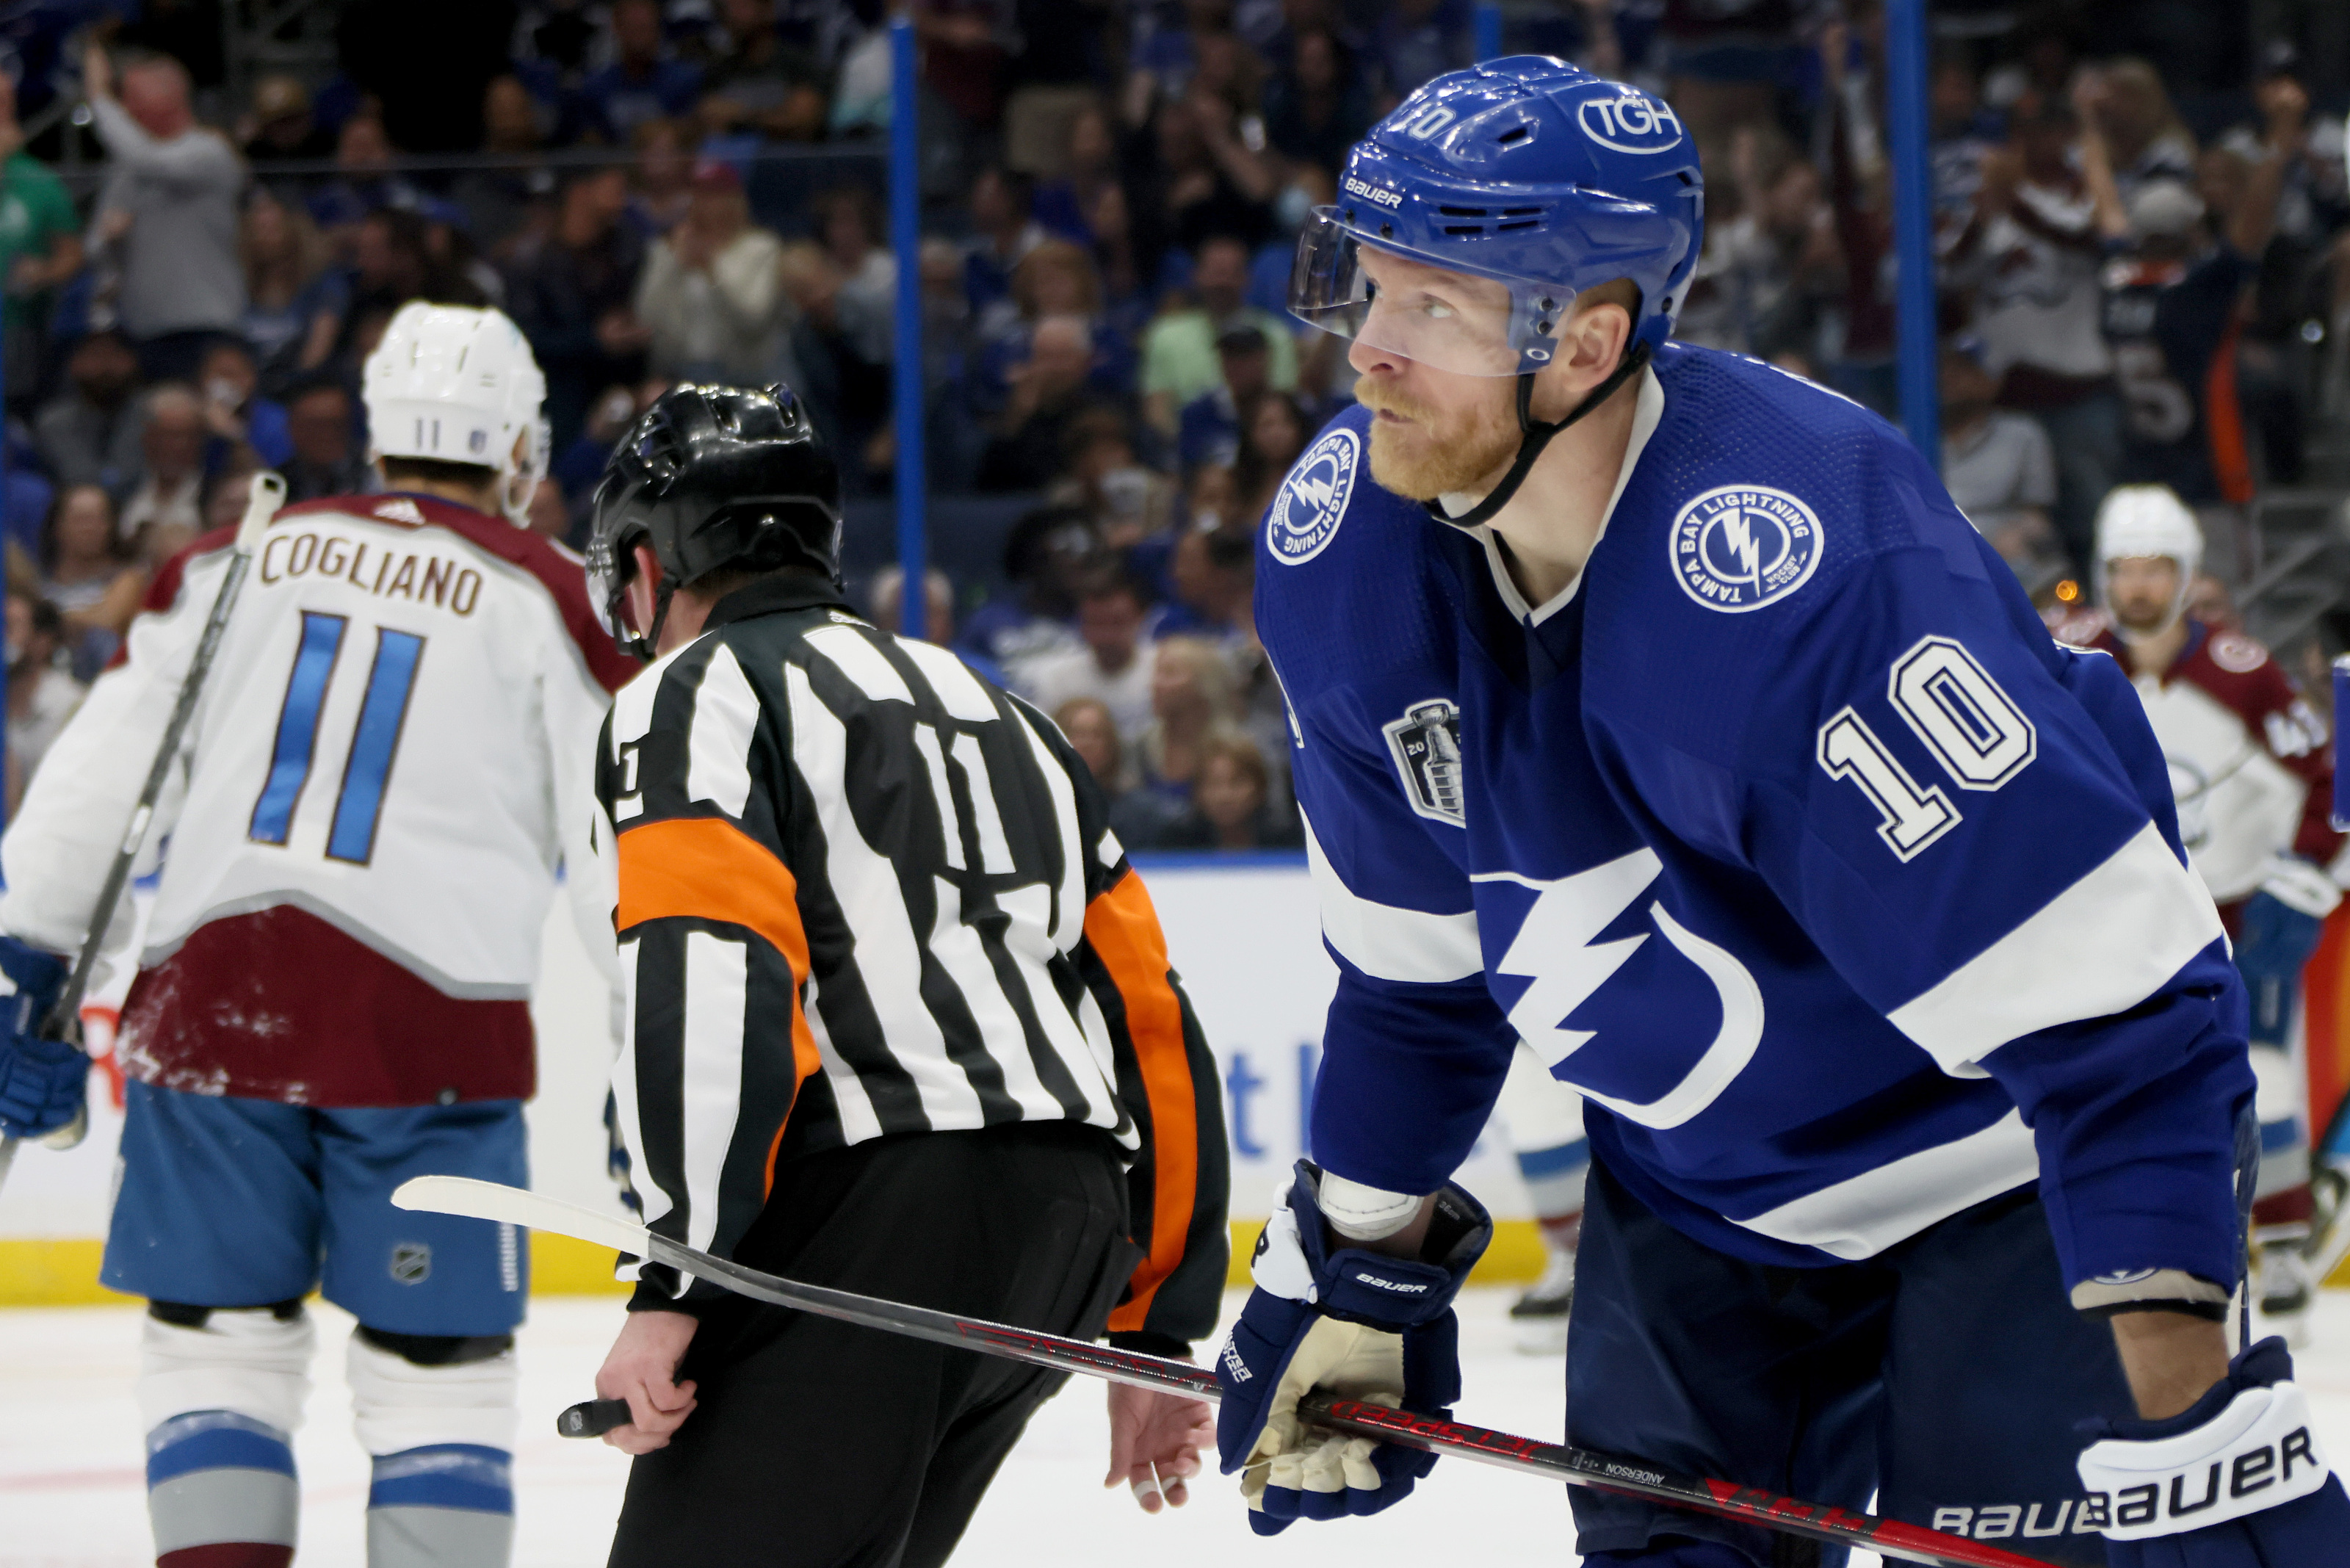 Tampa Bay Lightning win second straight Stanley Cup